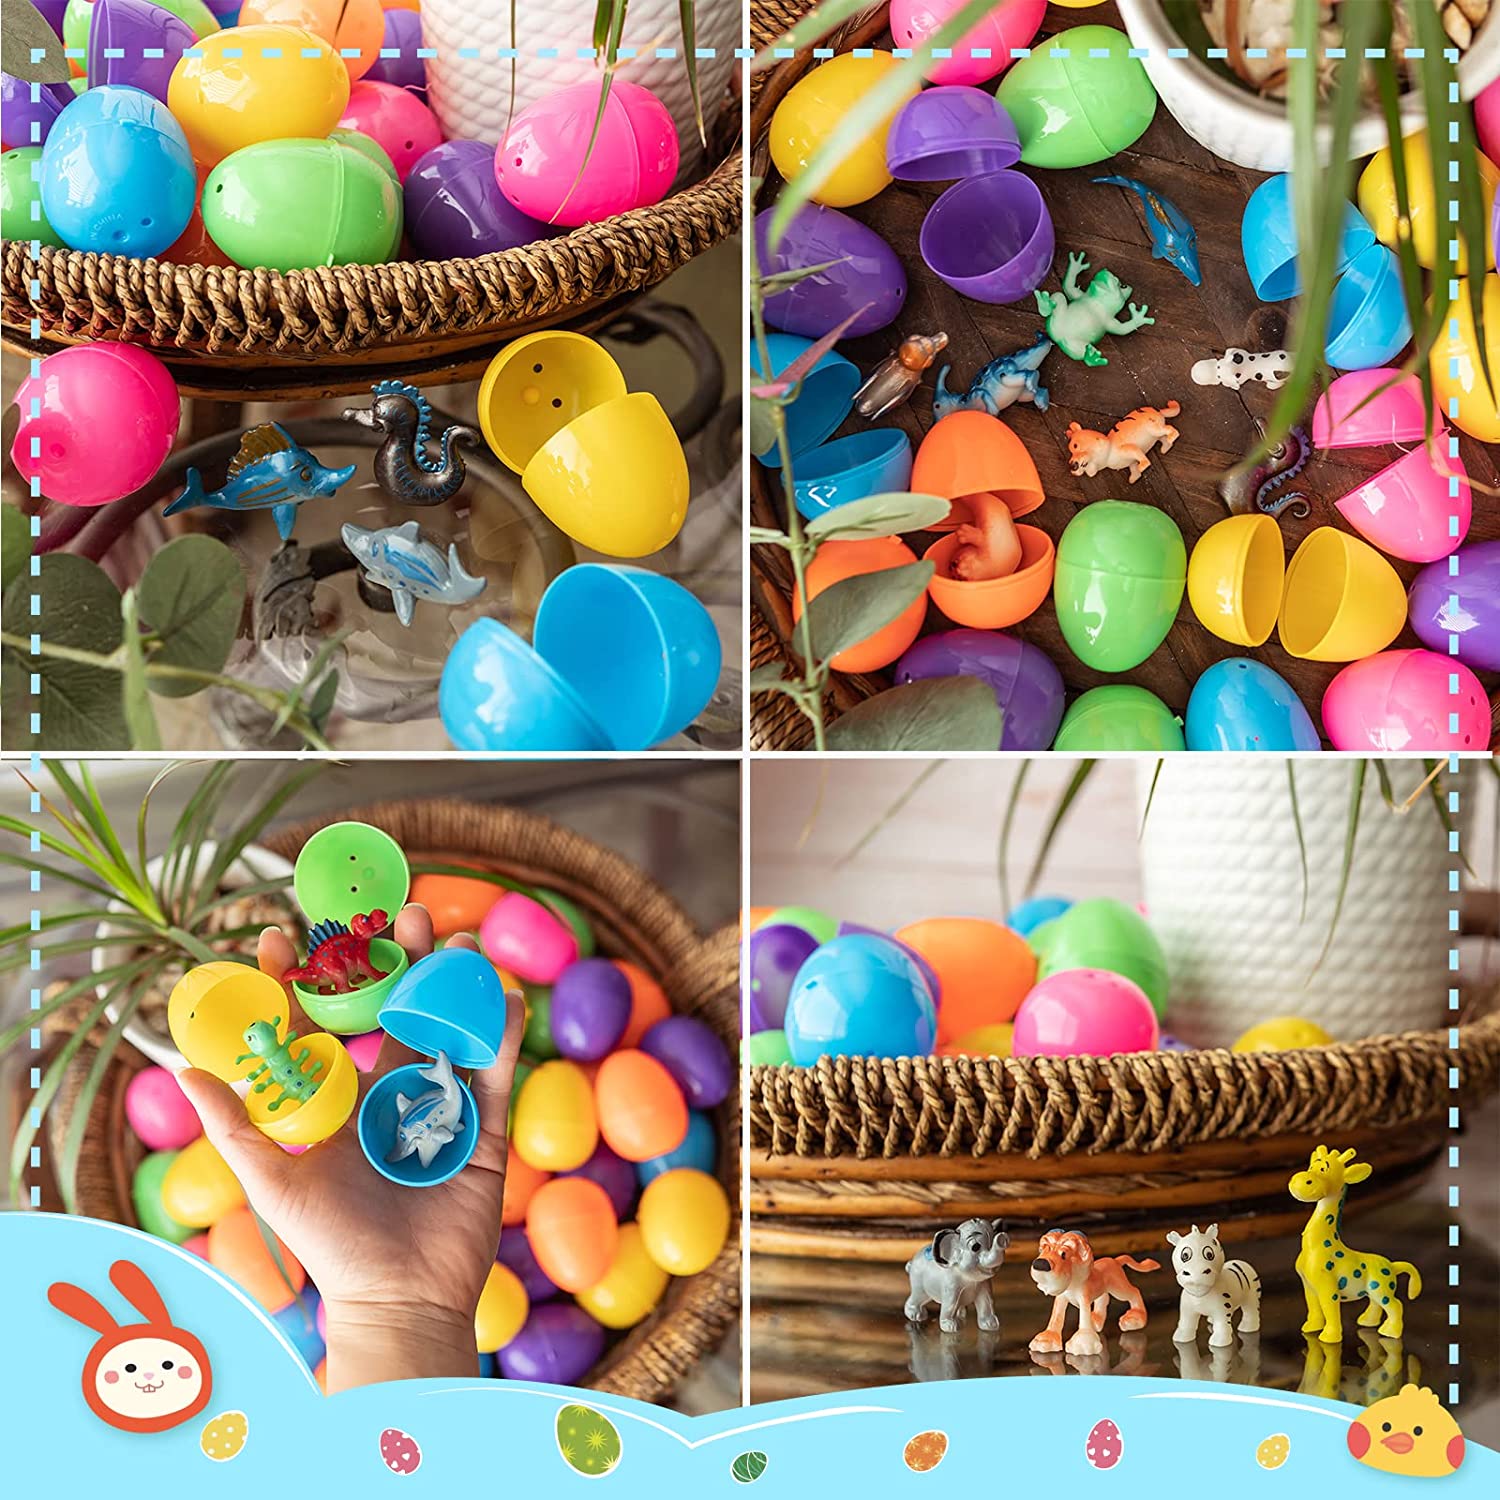 Fun Little Toys 48 Pcs Easter Eggs Filled with Mini Animals, Bright Colorful Easter Eggs Prefilled with Animal Toys for Easter Basket Stuffers, Easter